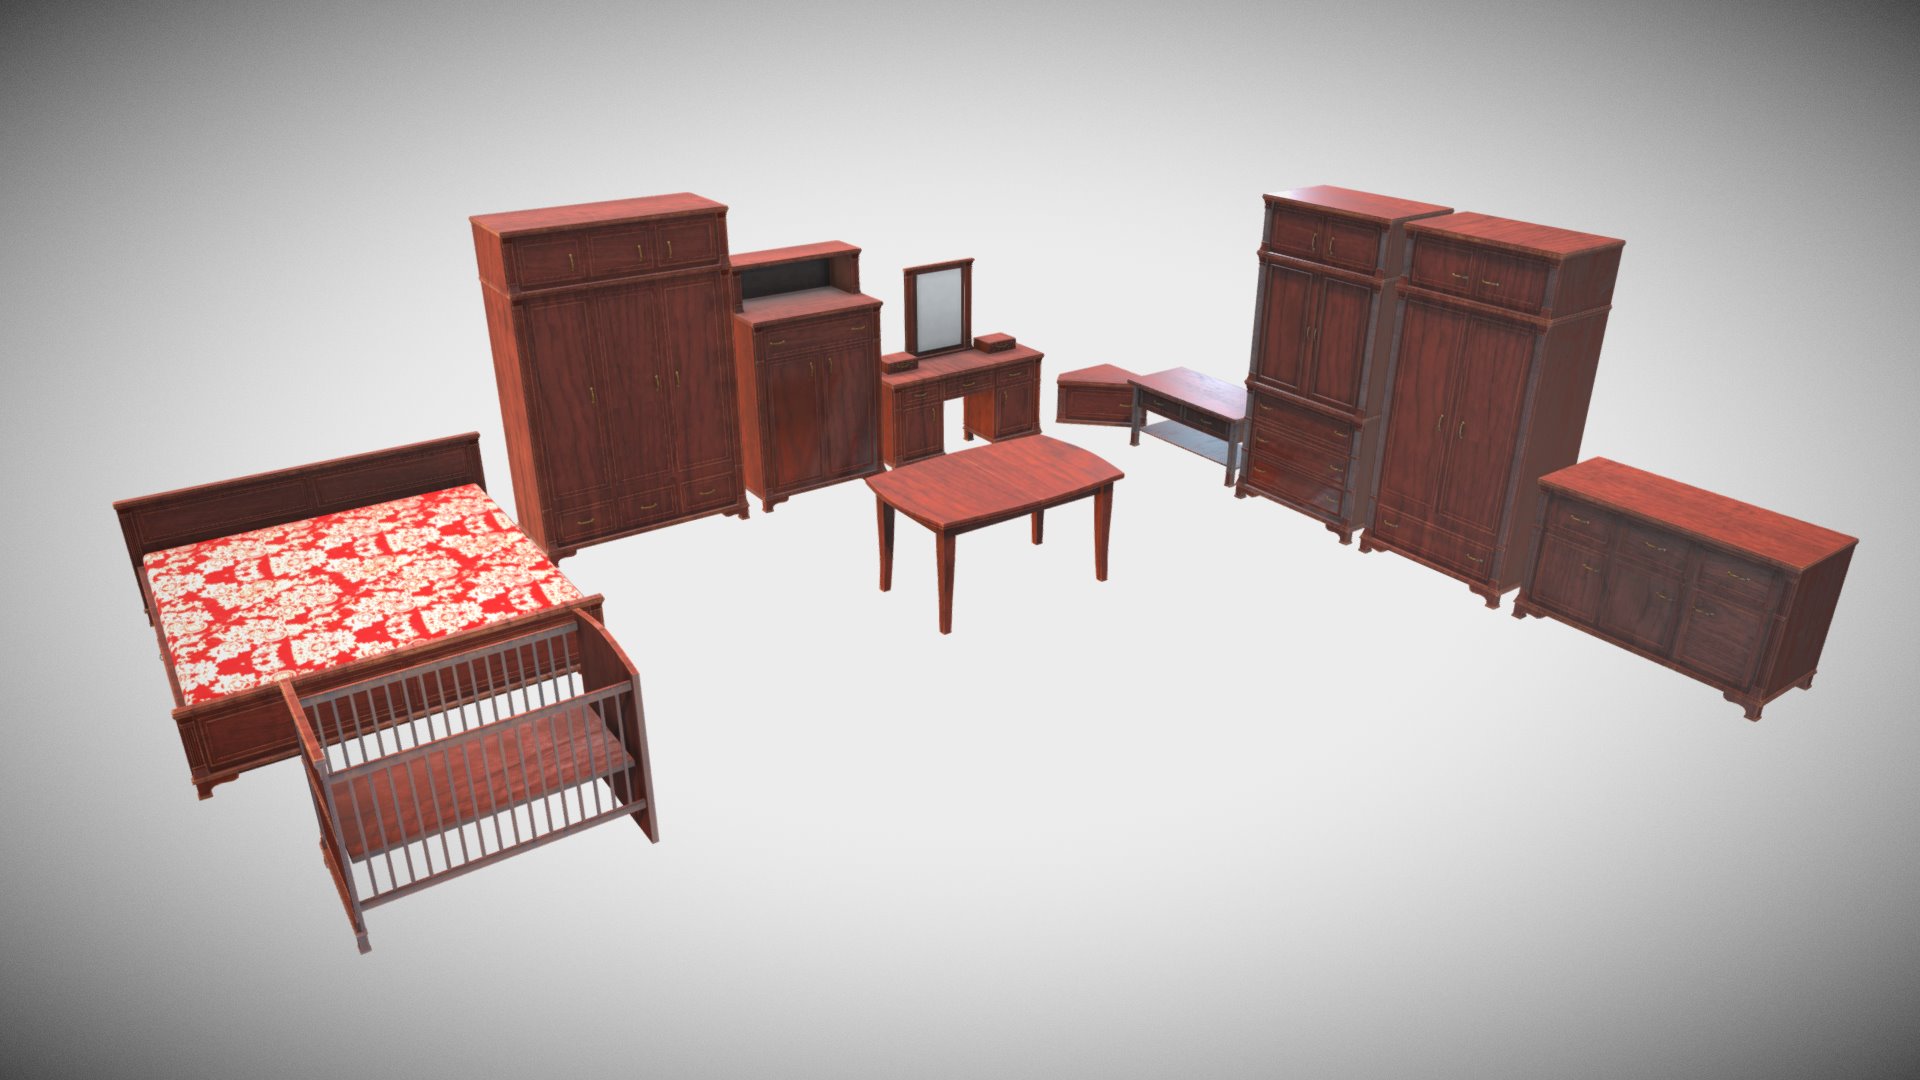 3D model Room Set Gnu - This is a 3D model of the Room Set Gnu. The 3D model is about a group of wooden chairs.